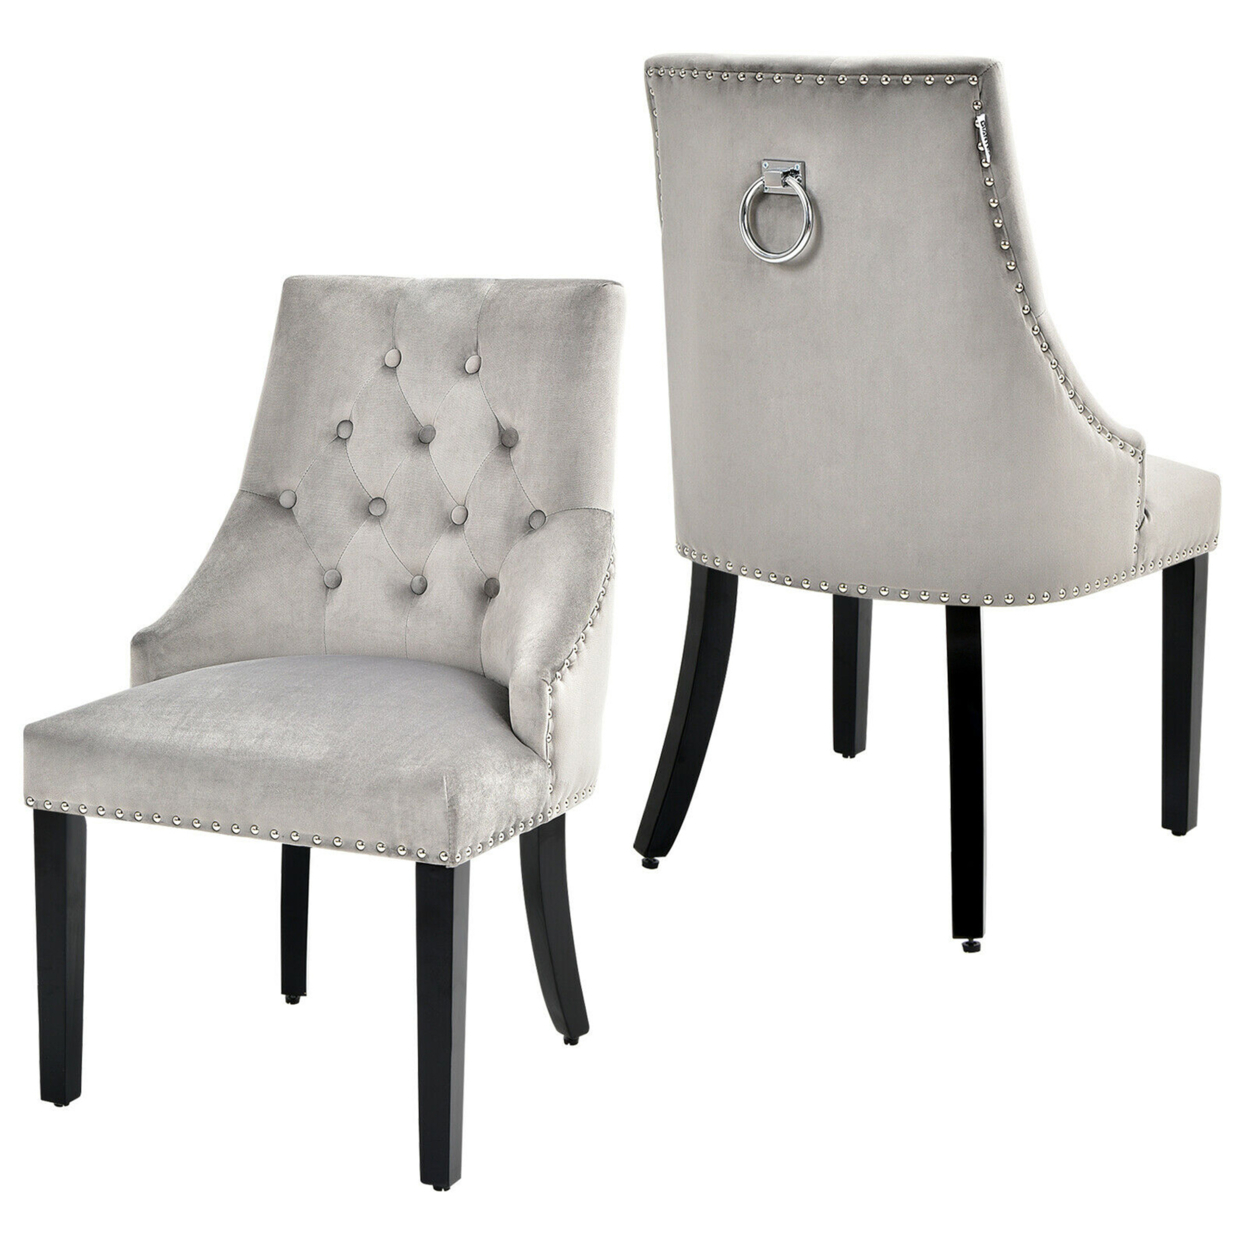 Set Of 2 Button-Tufted Dining Chair Upholstered Armless Side Chair - Grey